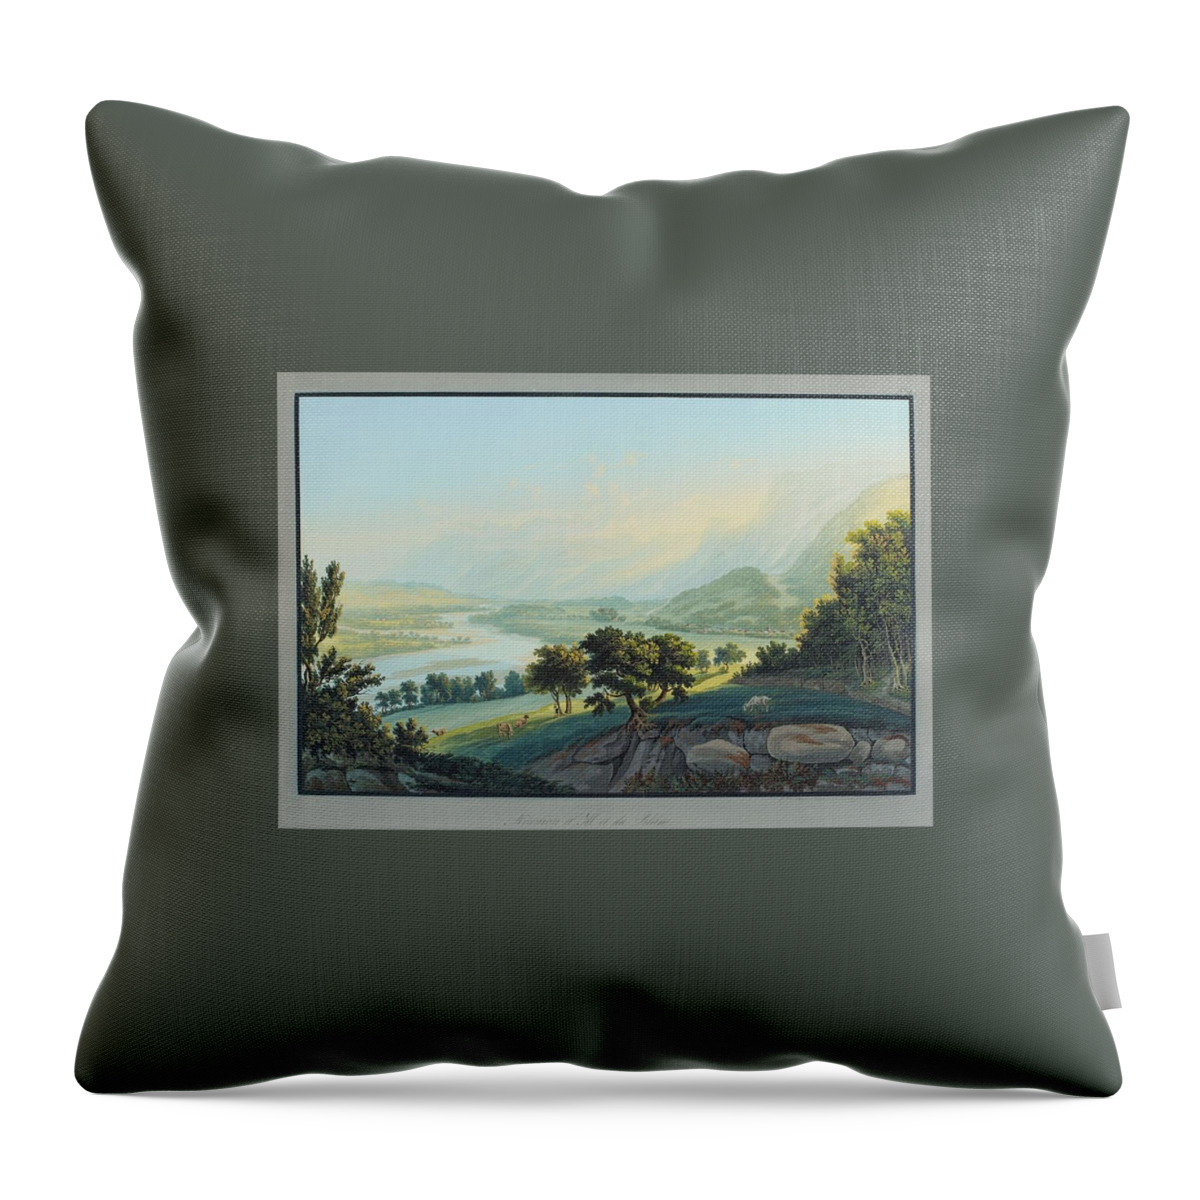 Bleuler Throw Pillow featuring the painting Nature #3 by Johann Ludwig